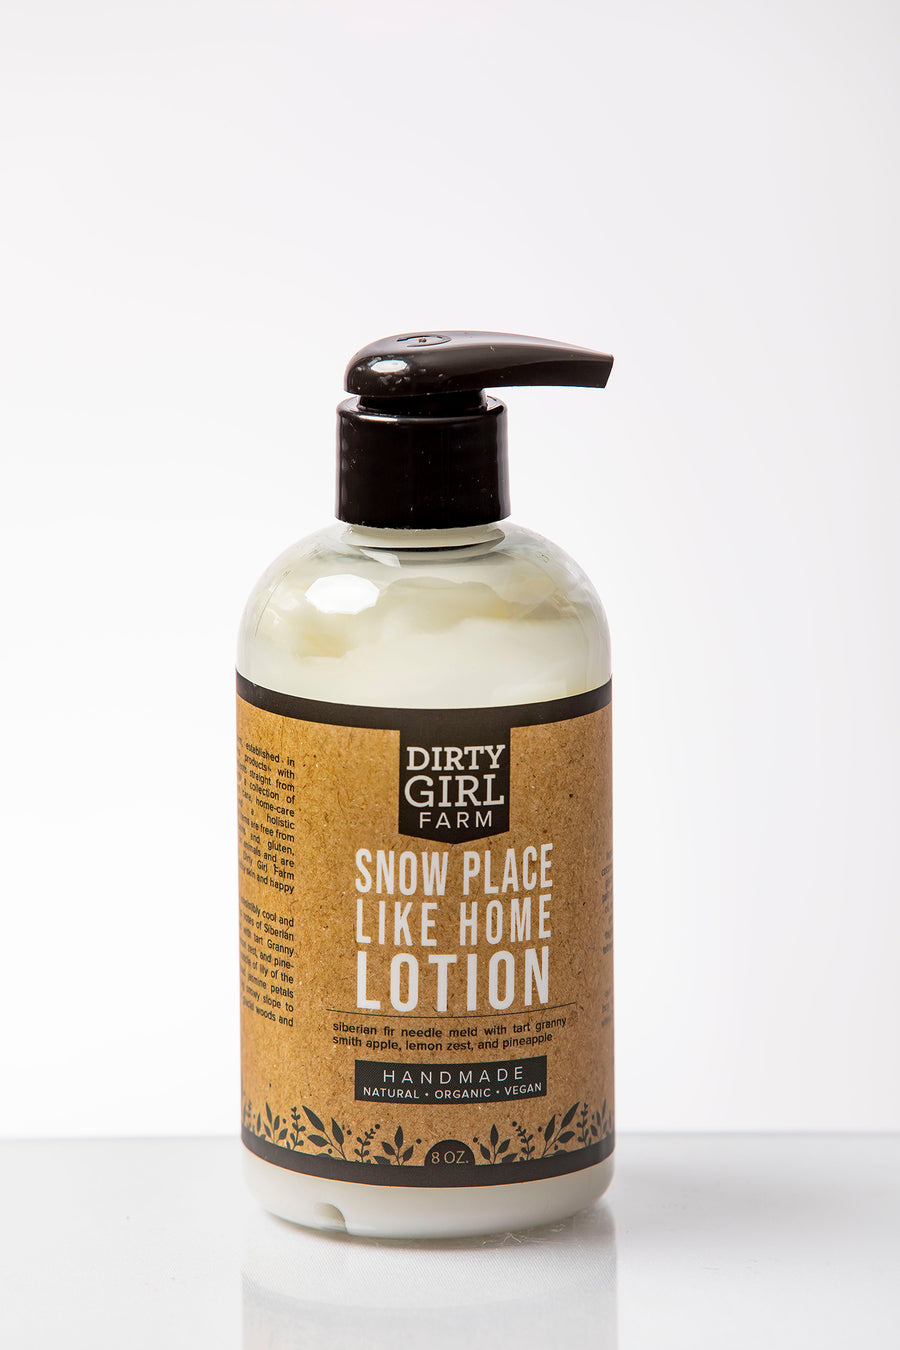 Snow Place Like Home Lotion